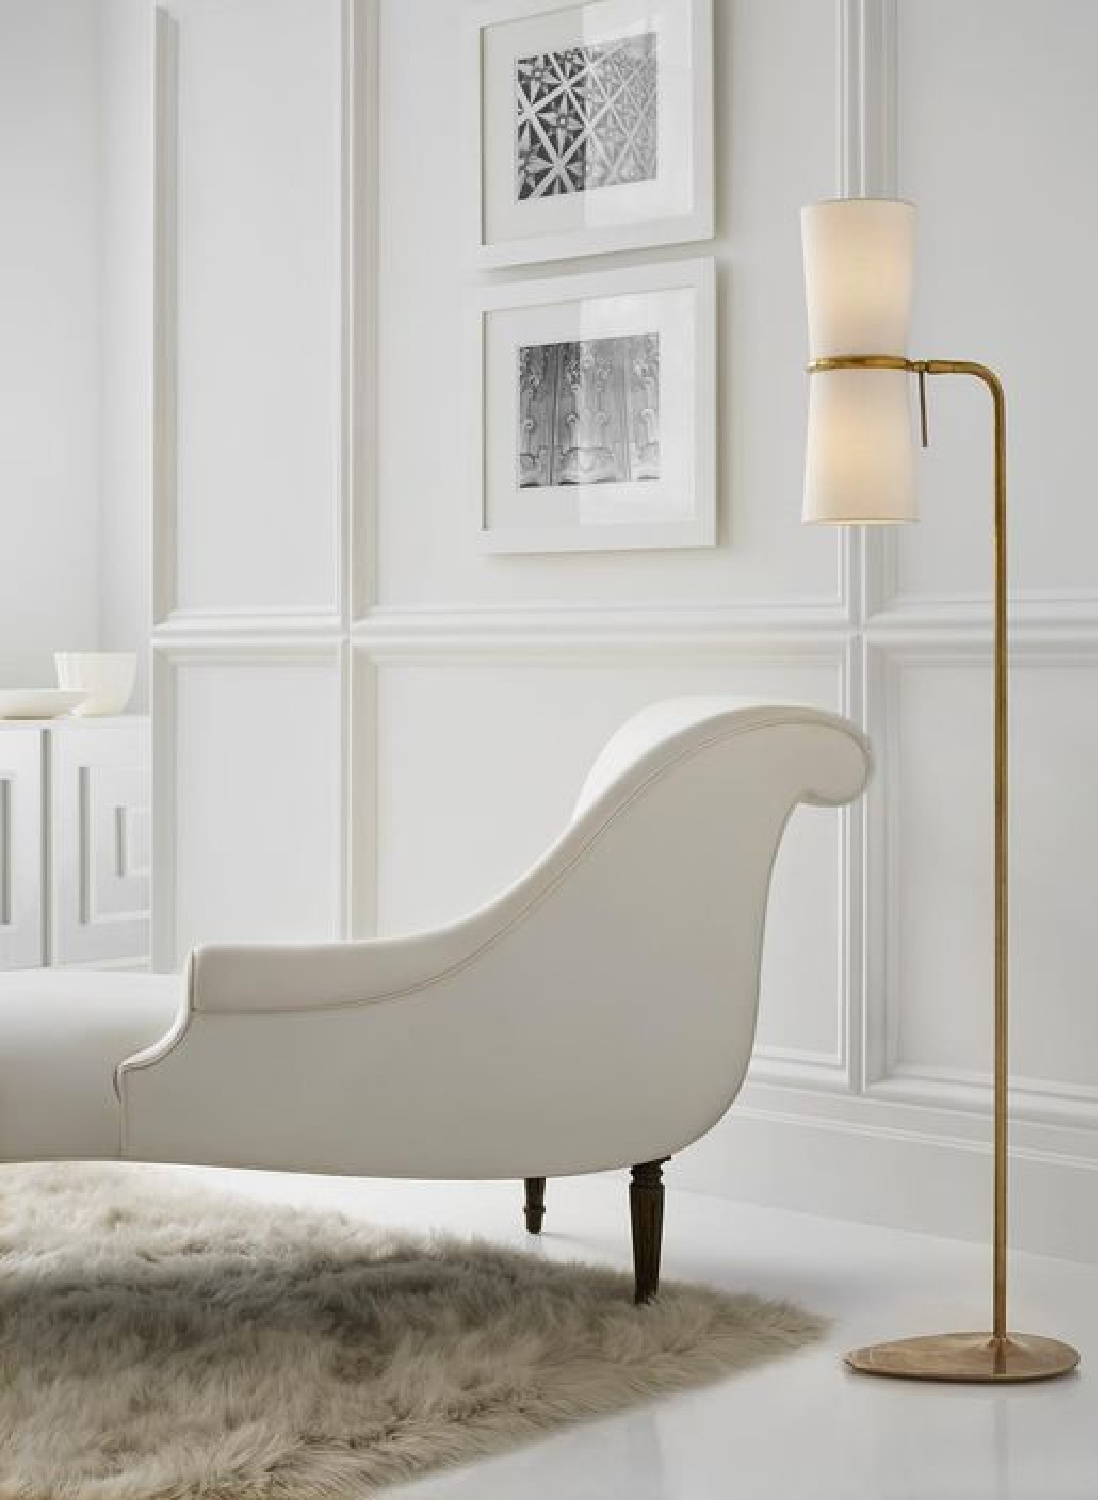 Benjamin Moore White Dove on walls in elegant room. Come explore Interior Designers Favorite White Paint Colors for ideas, photos, and inspiration.